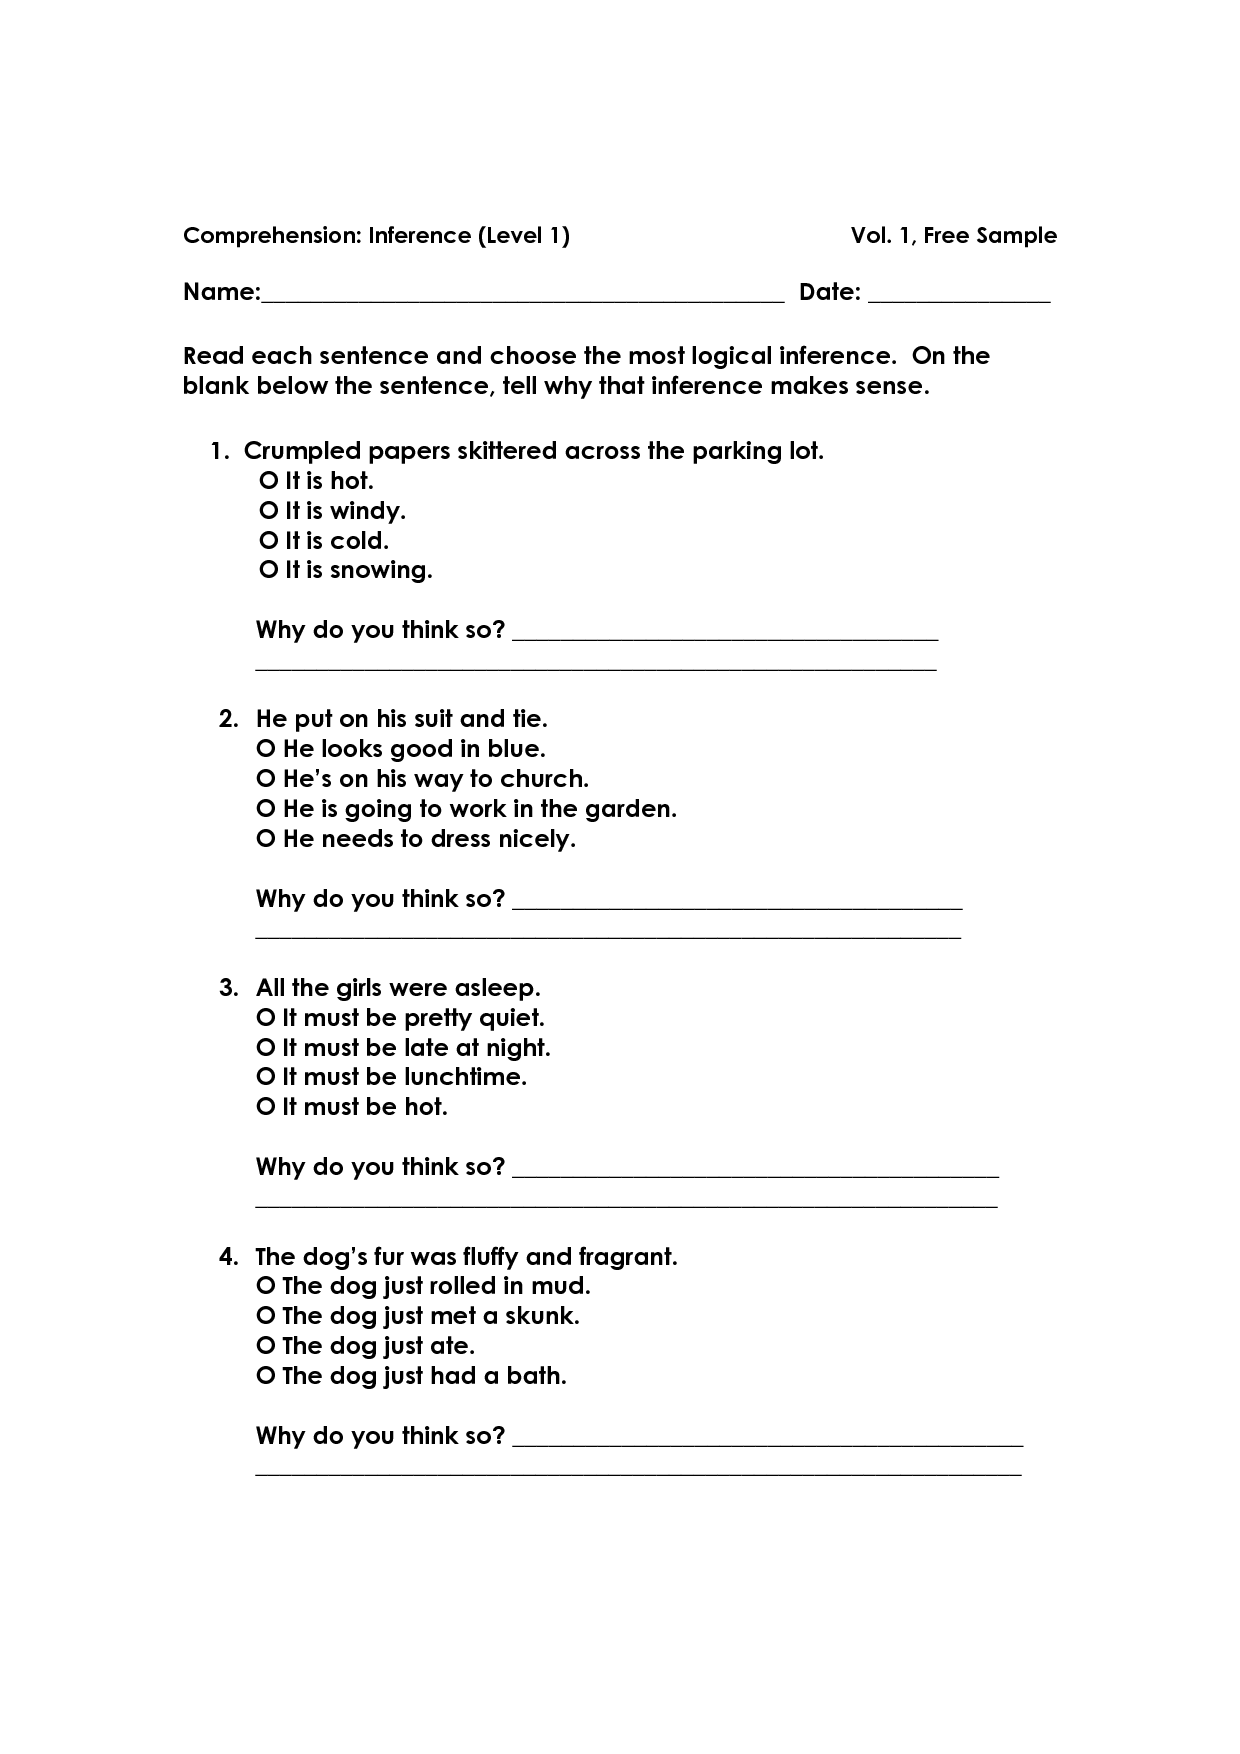 15 Best Images of Vocabulary Inference Worksheet  Reading Vocabulary Worksheets, Inference 